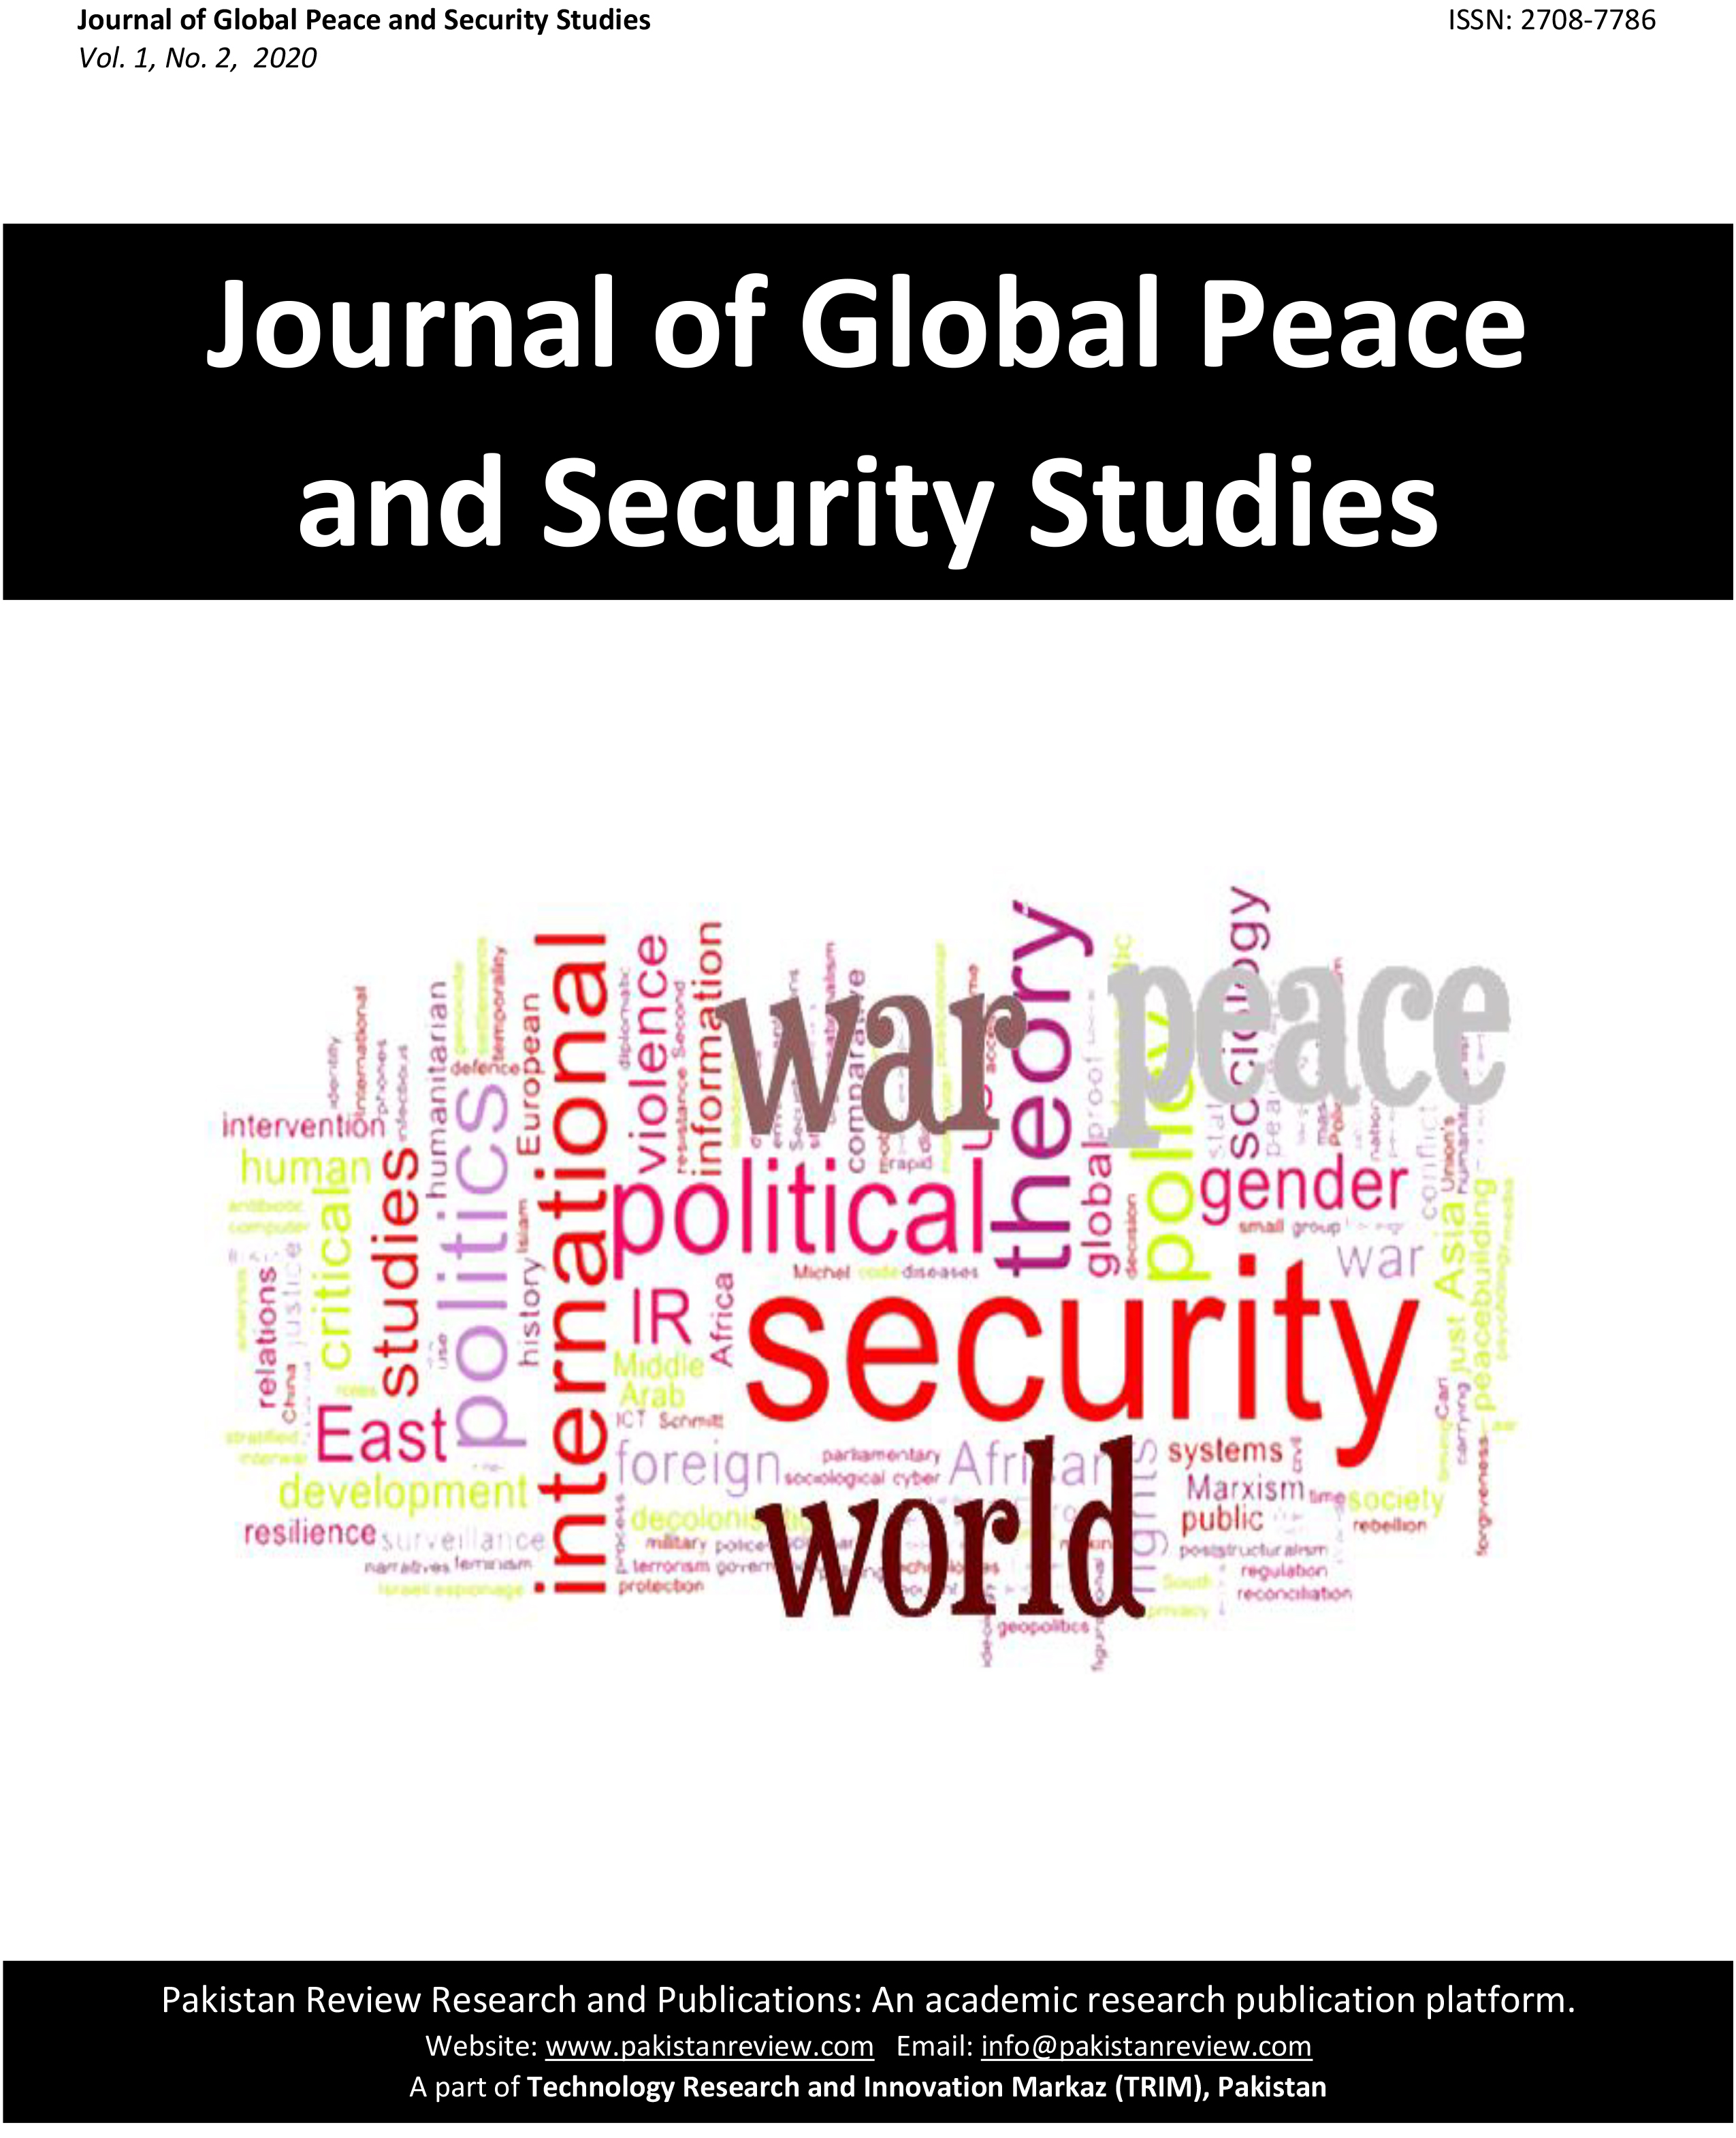 					View Vol. 1 No. 2 (2020): Journal of Global Peace and Security Studies (JGPSS)
				